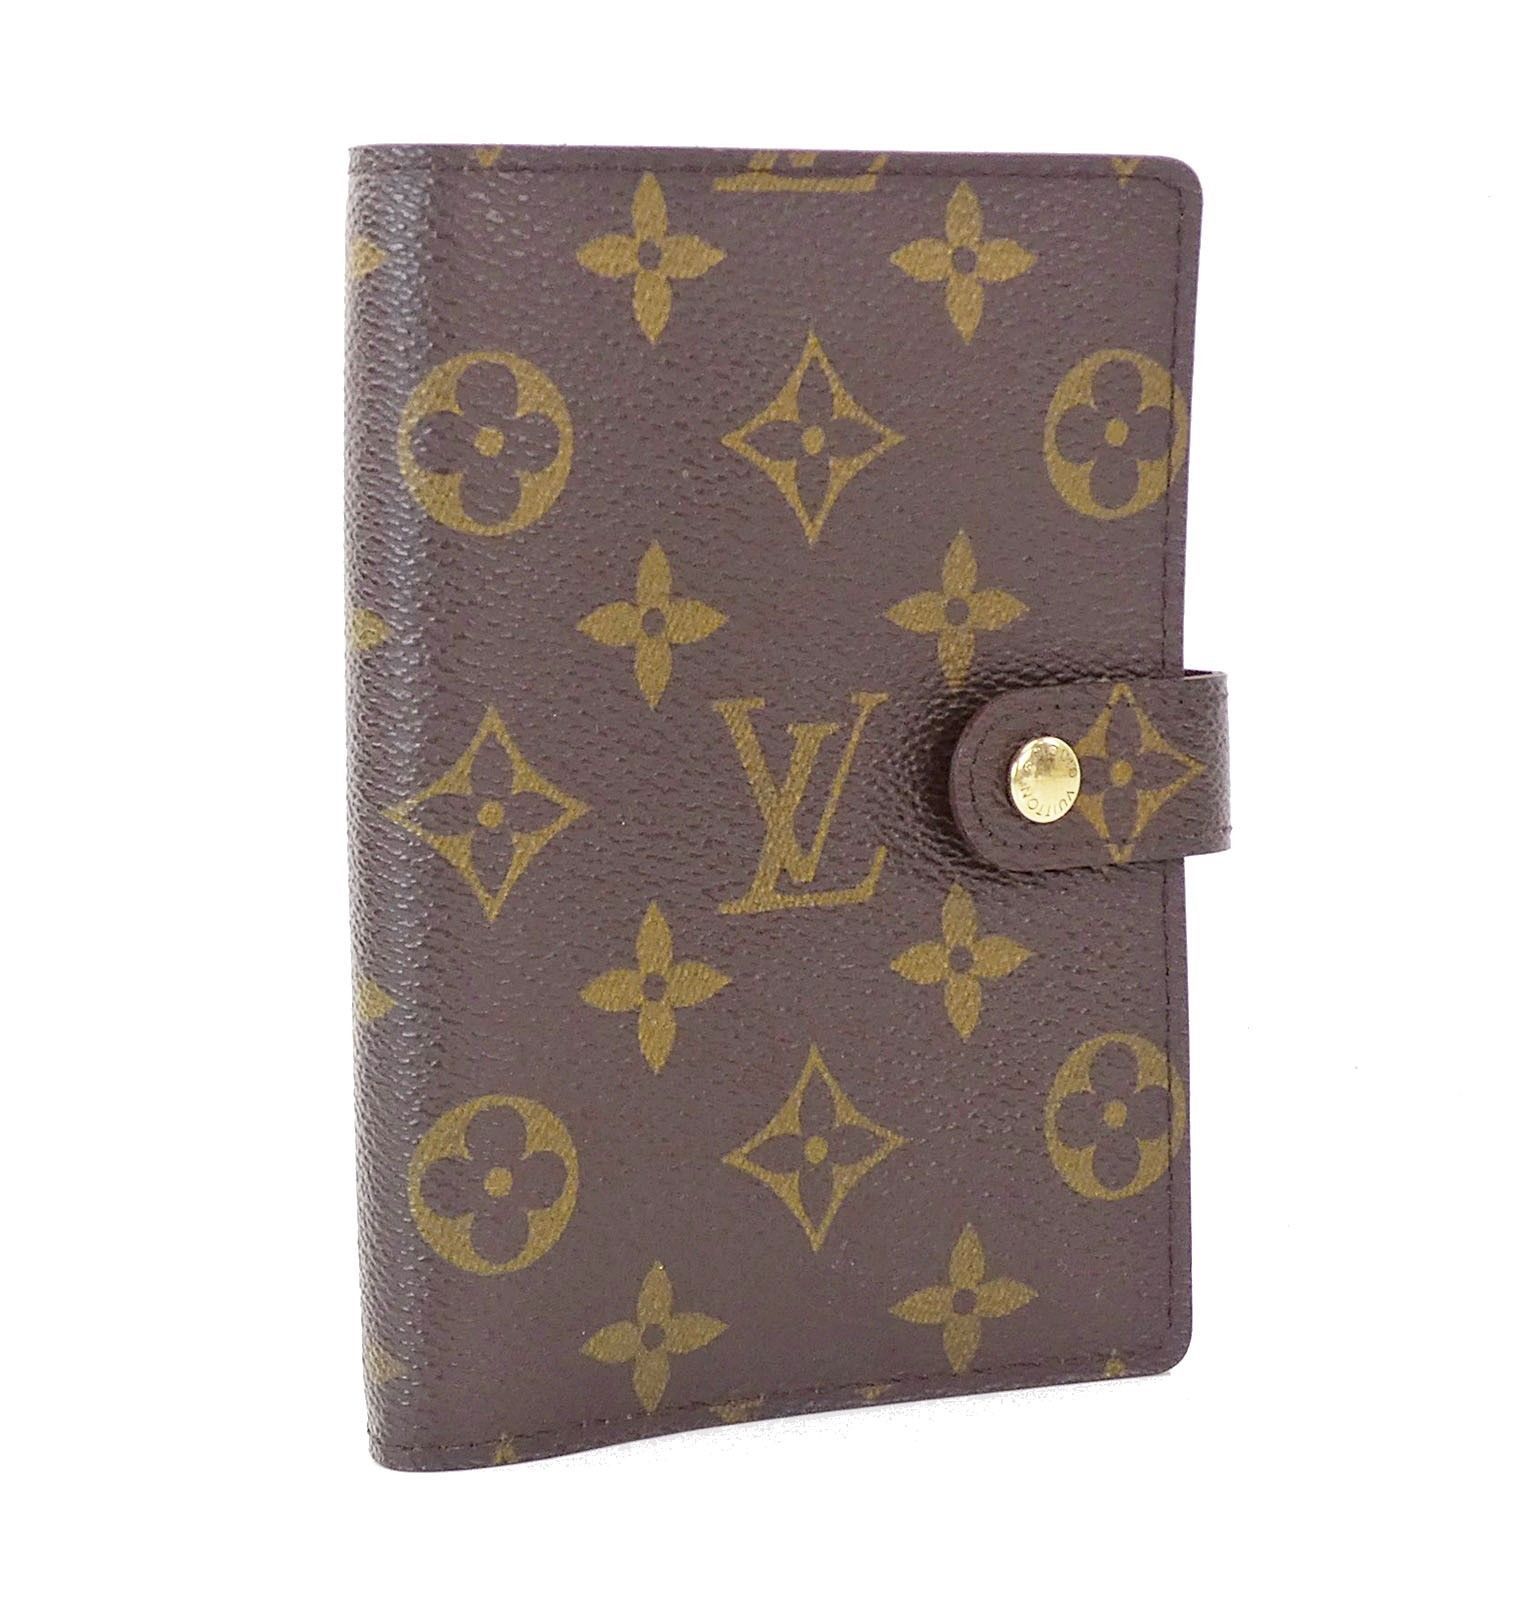 Authentic LOUIS VUITTON Monogram 6 Ring Agenda Address Book Cover #29425A - Organizers, Planners